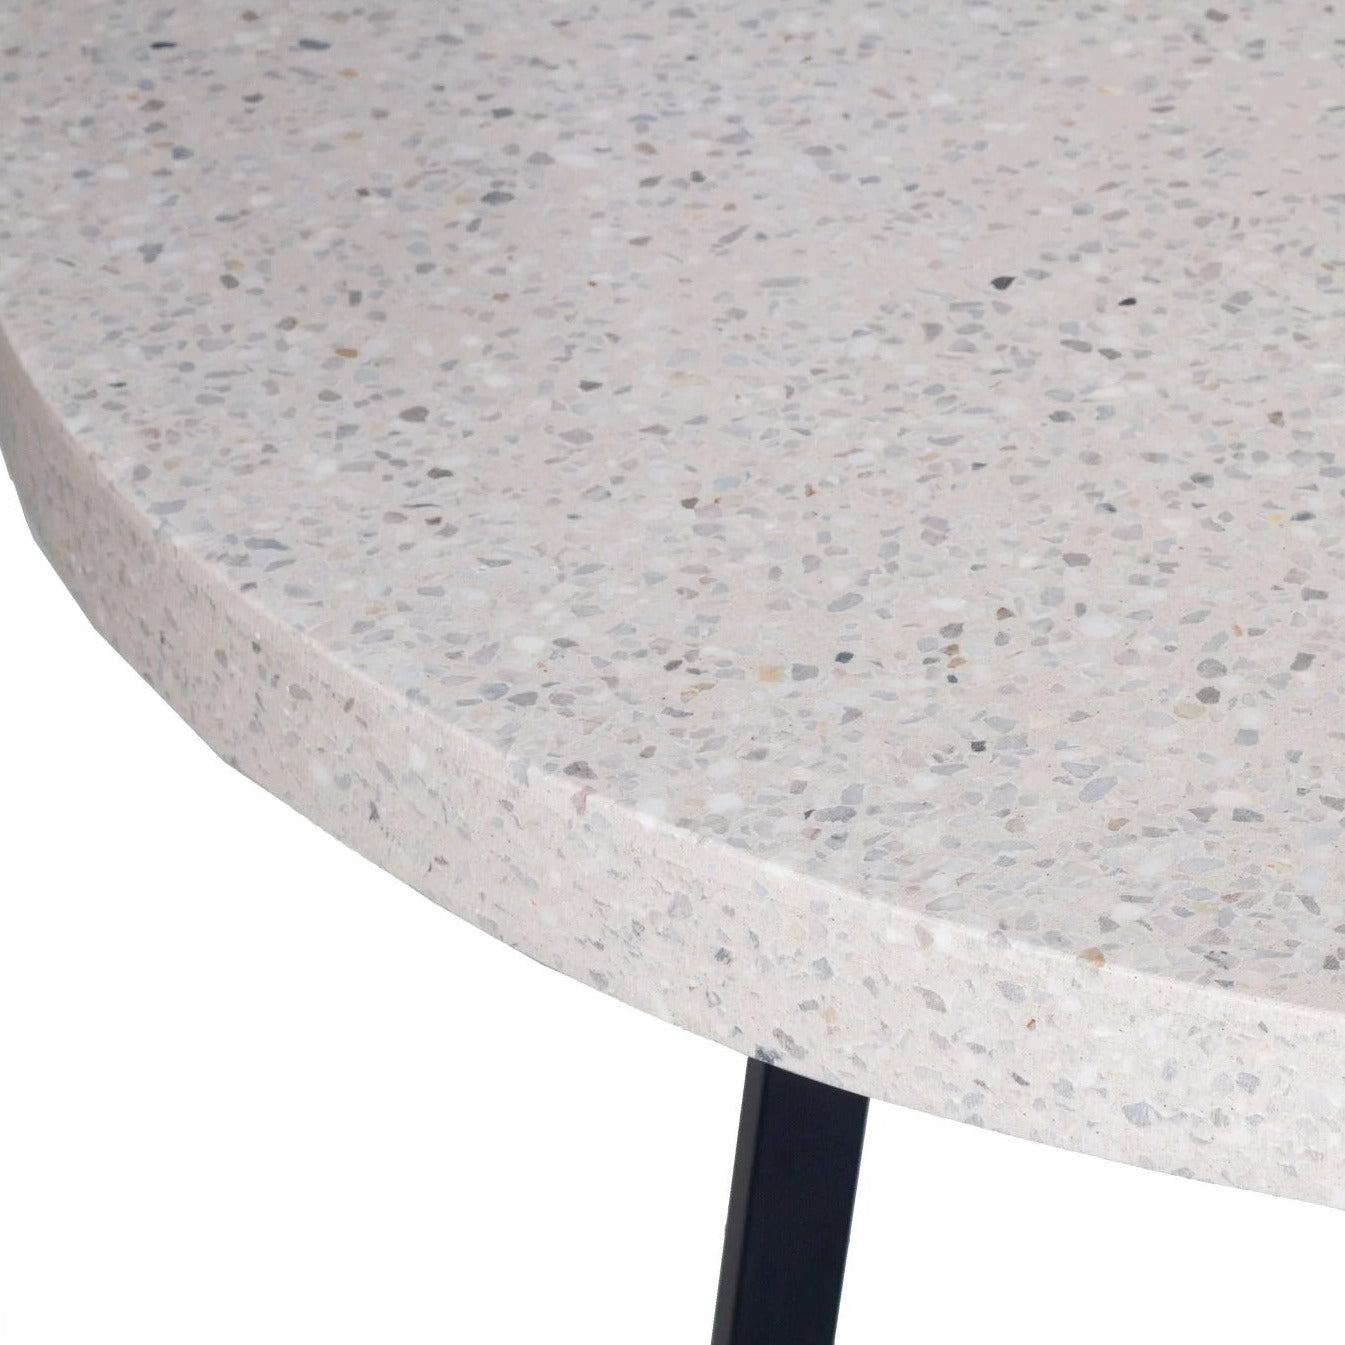 eTerrazzo Round Dining Table (Ivory Coast with Black Metal Legs).